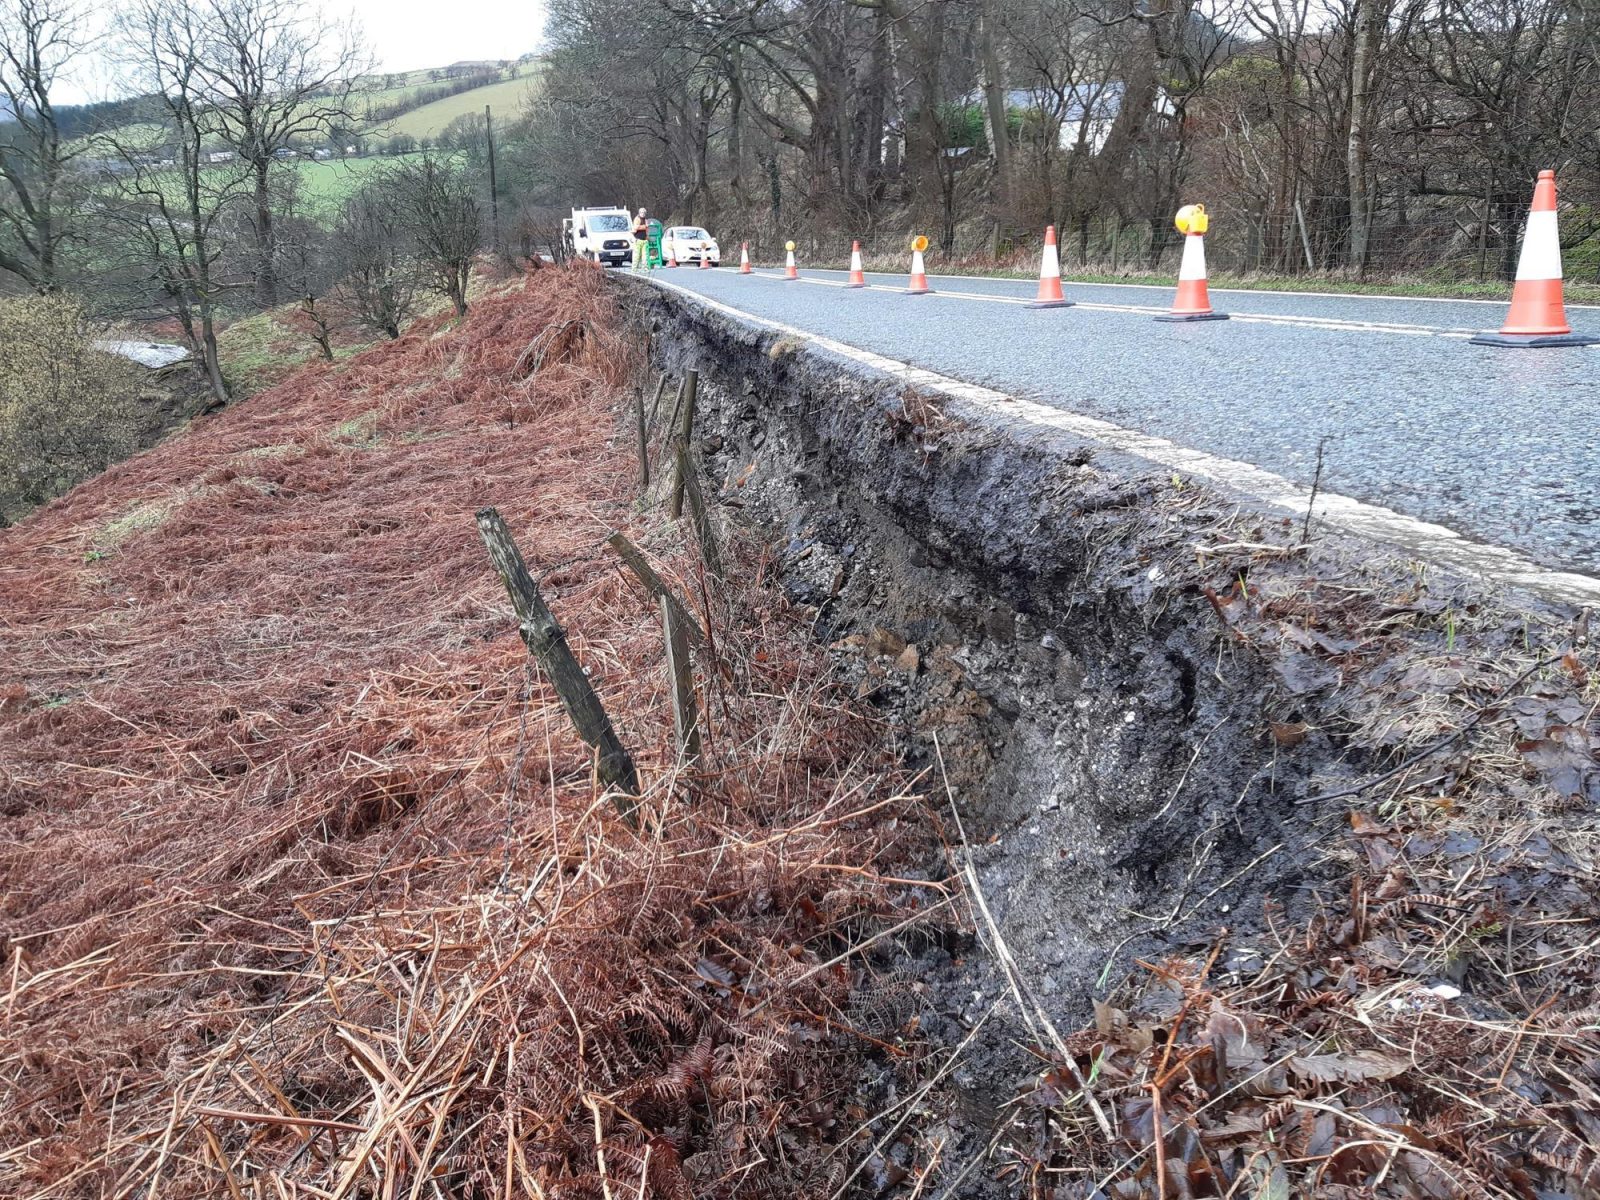 Snake Pass through the Peak District expected to be closed for at least a month after &#8216;serious&#8217; landslips, The Manc